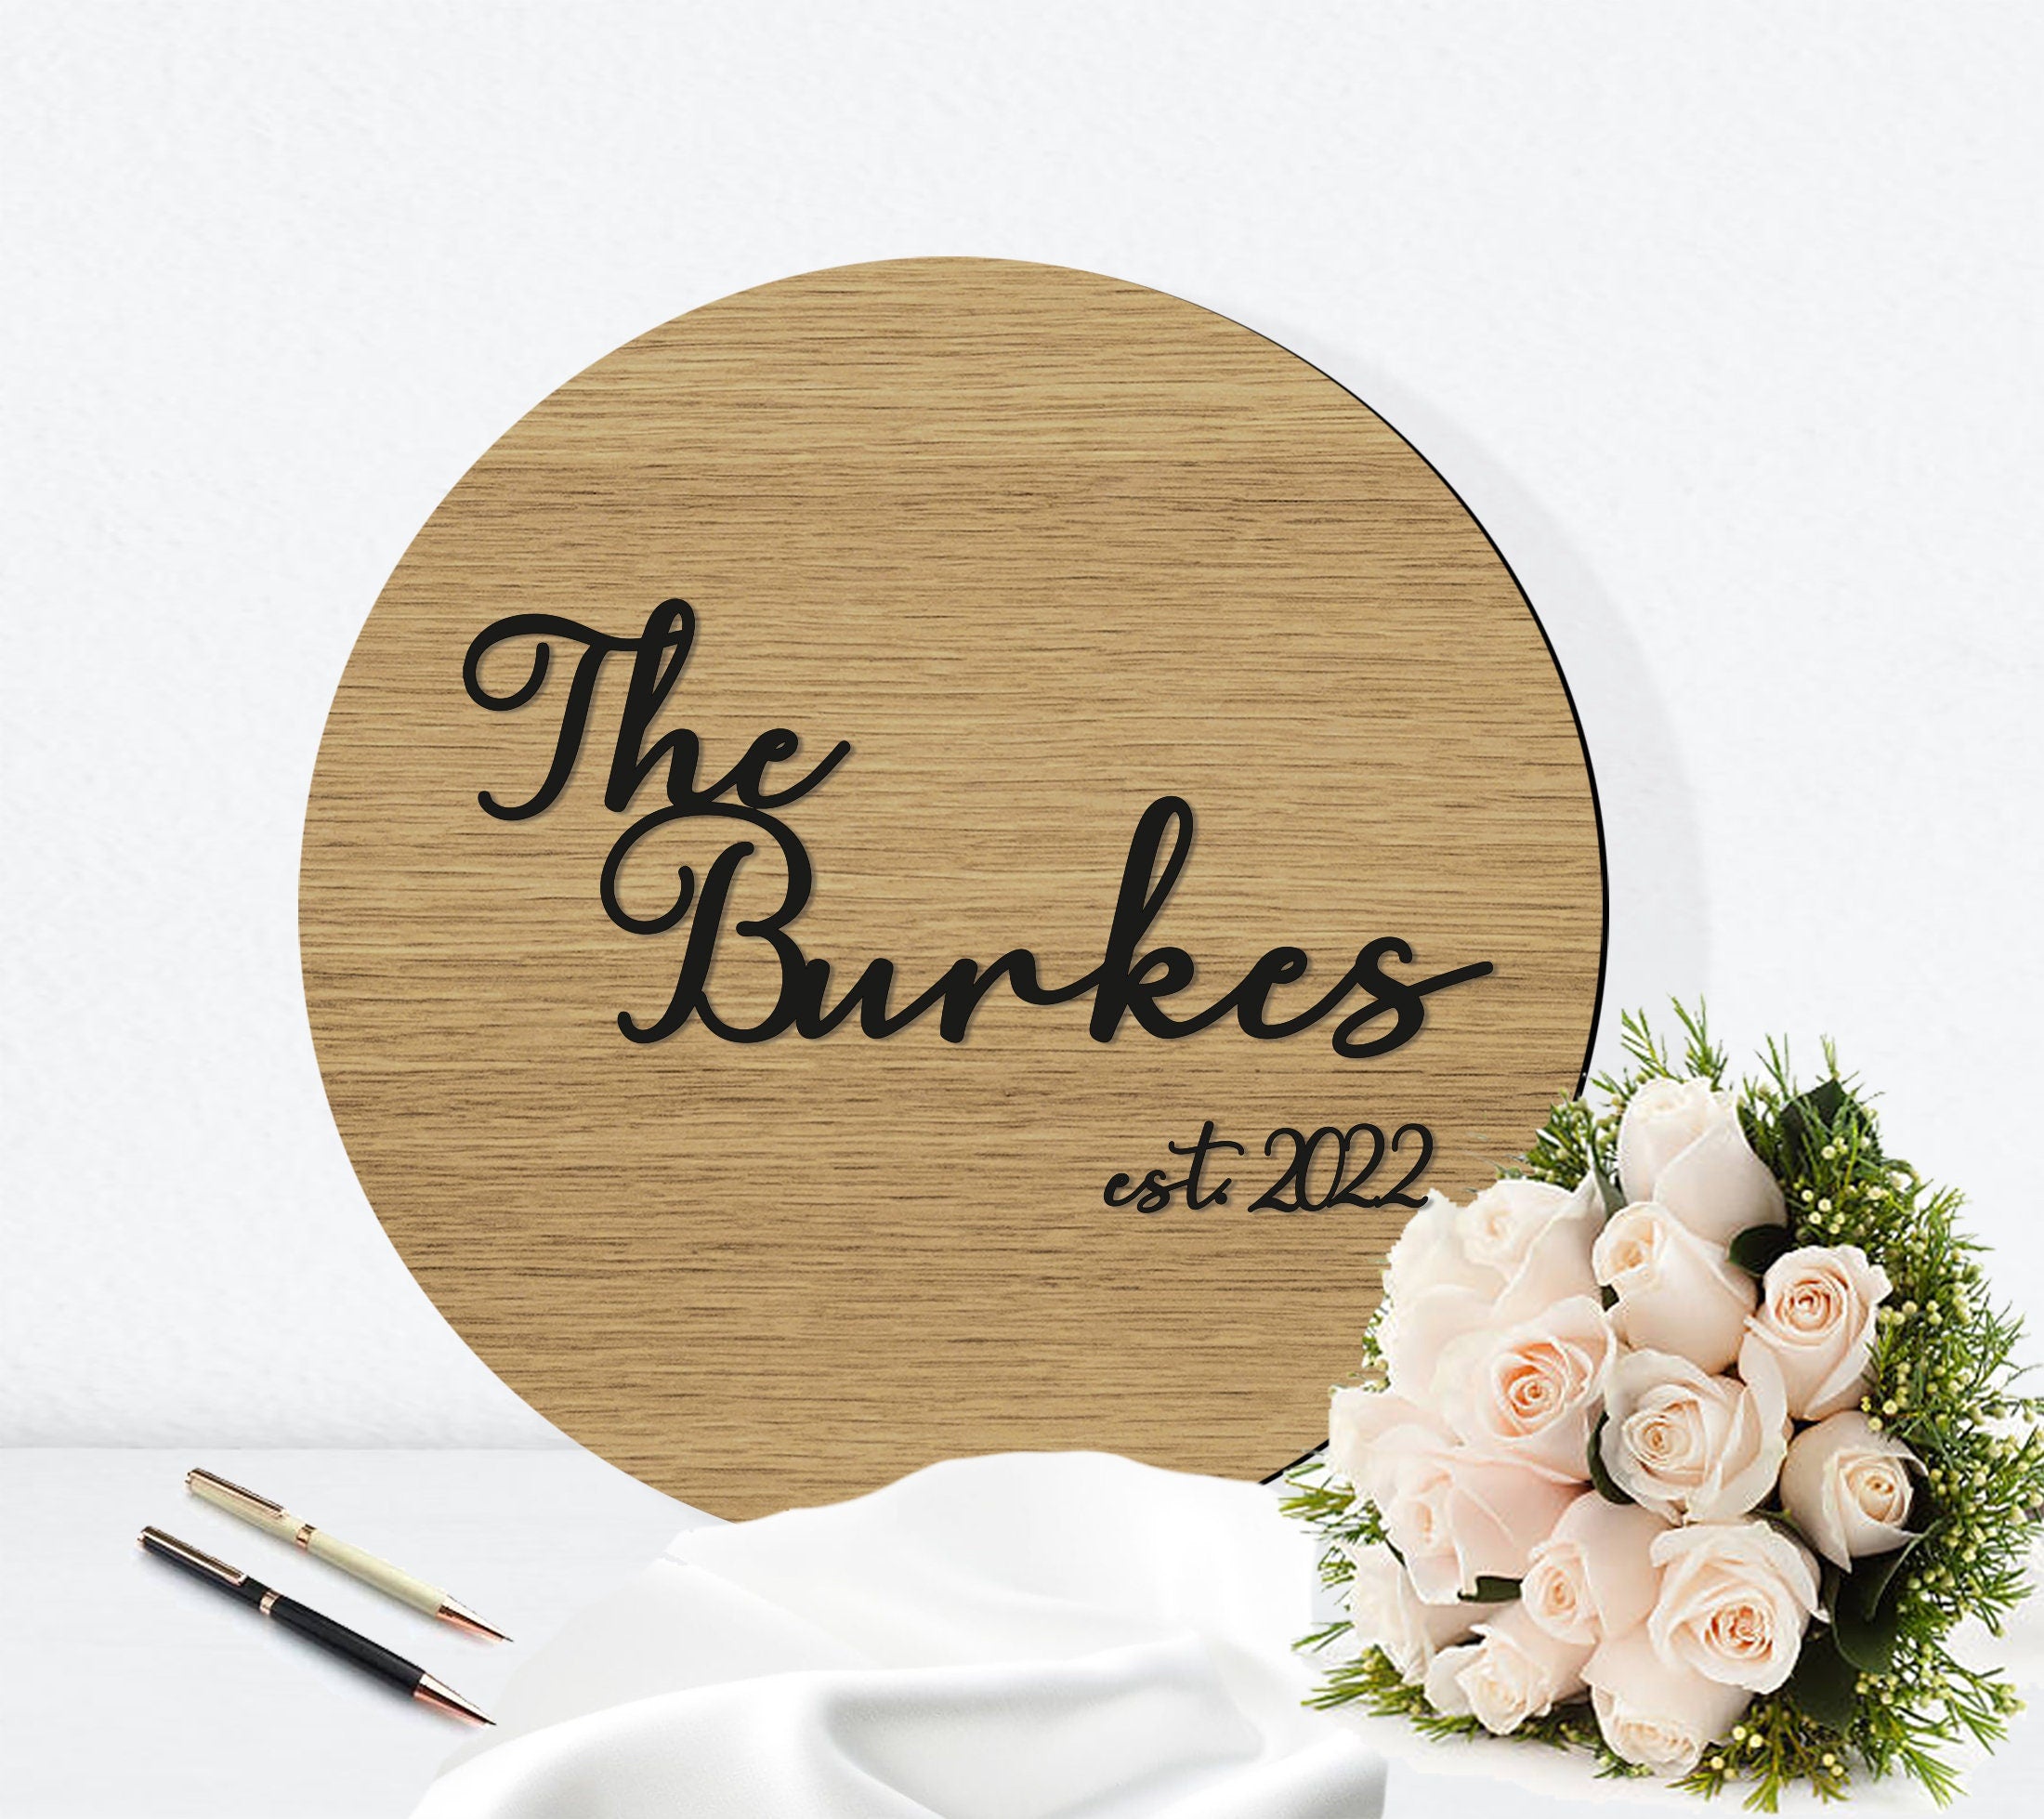 Circular Wood Wedding Guestbook Signing Board Round Alternative Guestbook - Classic Style